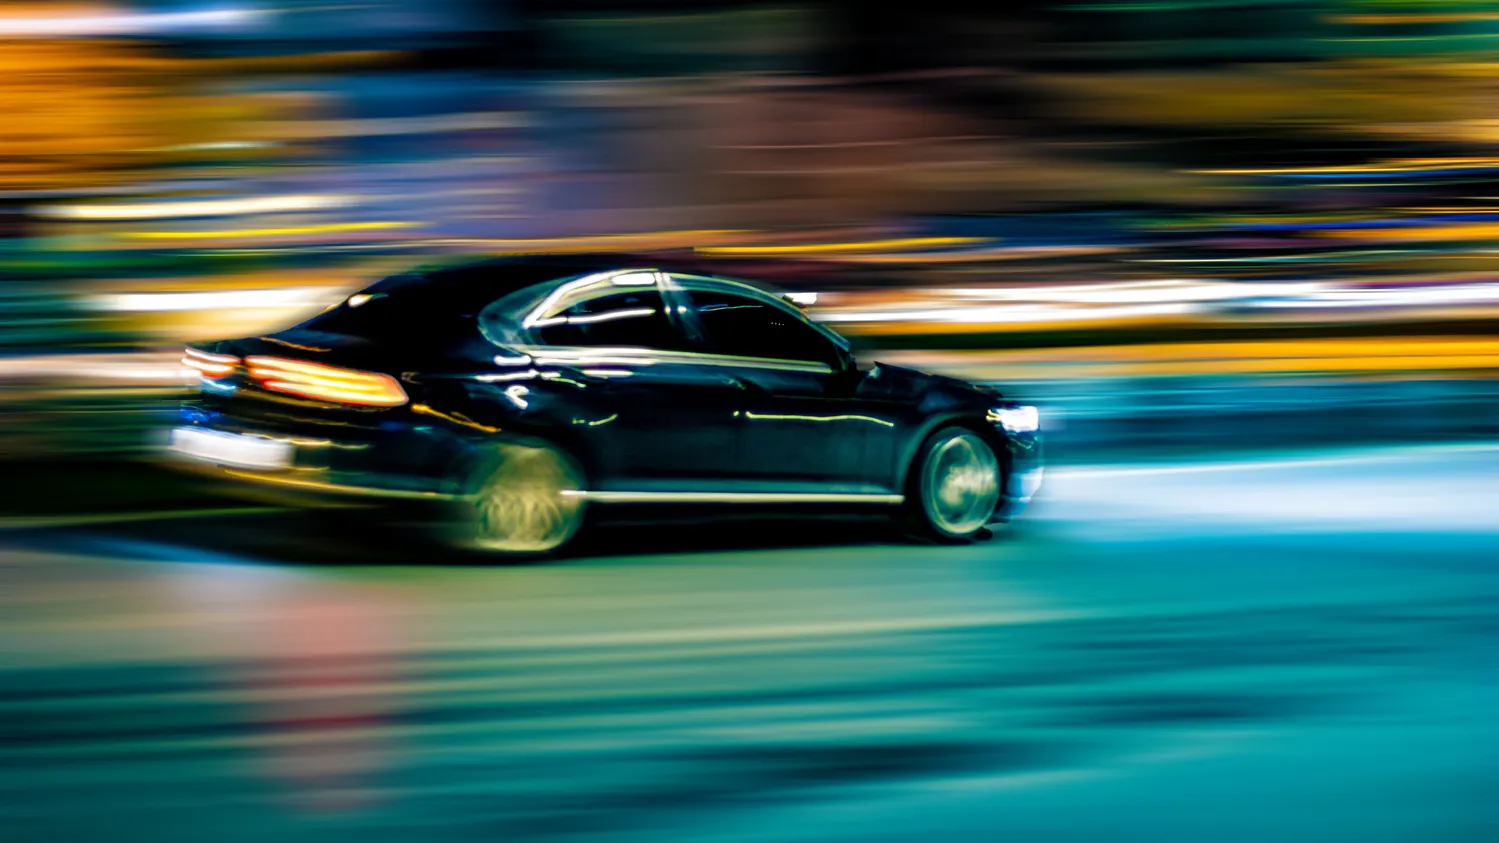 Image of a black car speeding on the road